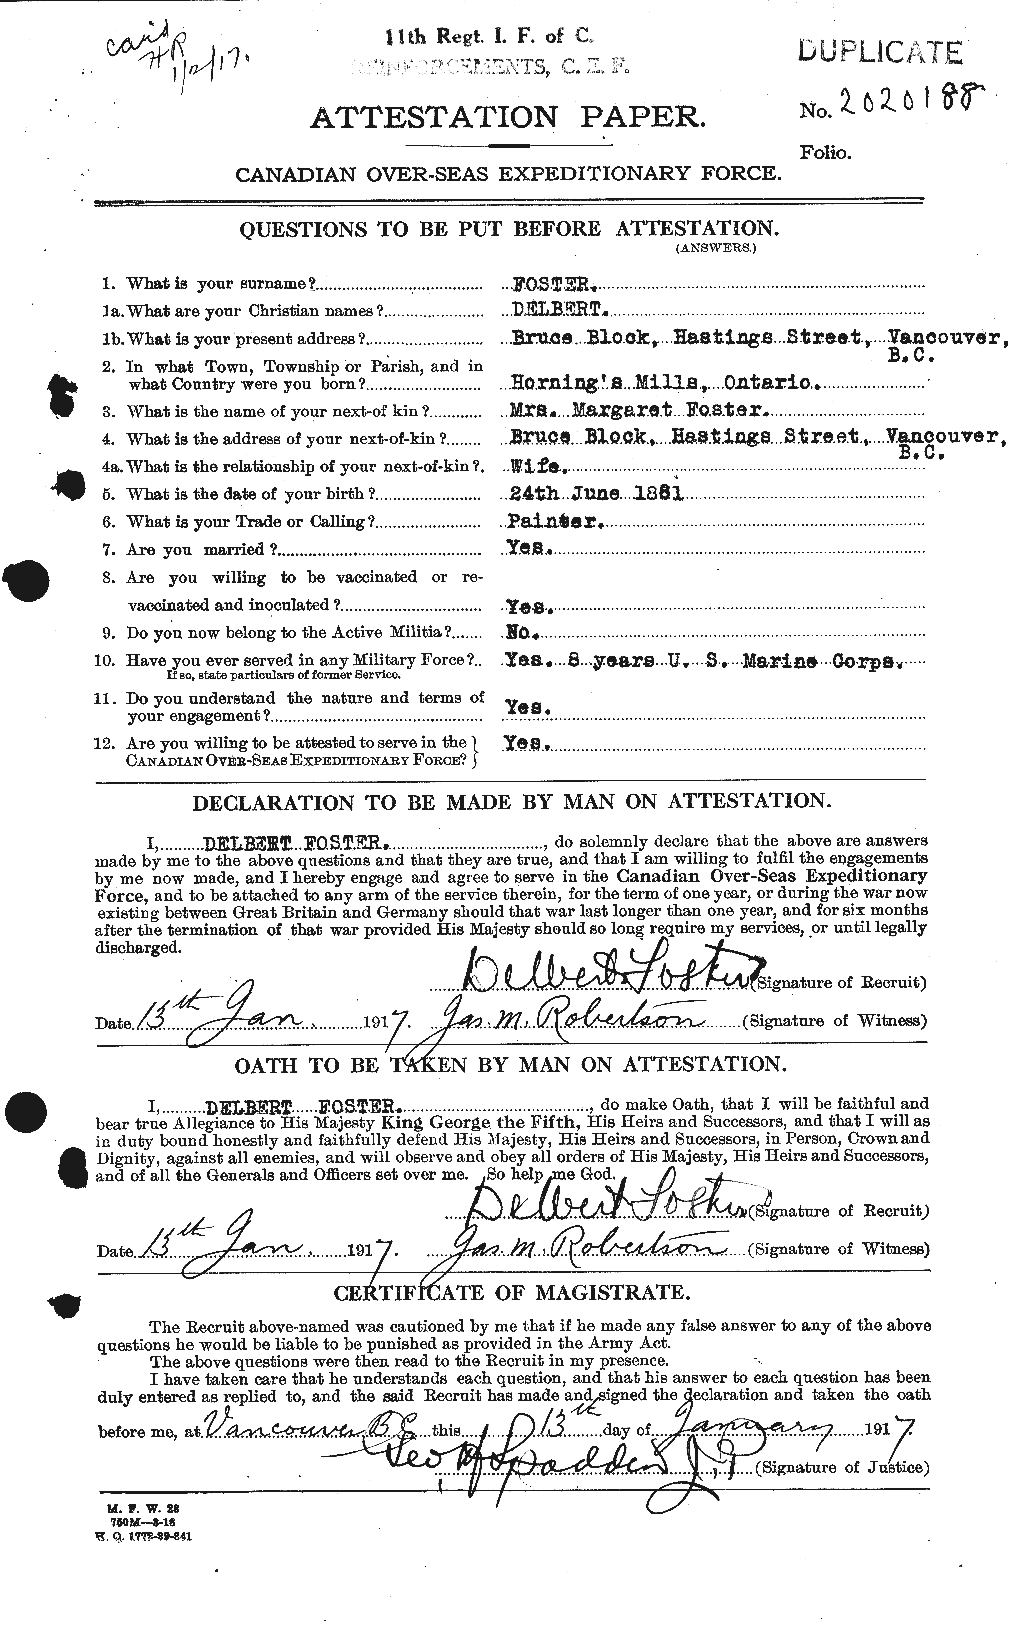 Personnel Records of the First World War - CEF 330561a